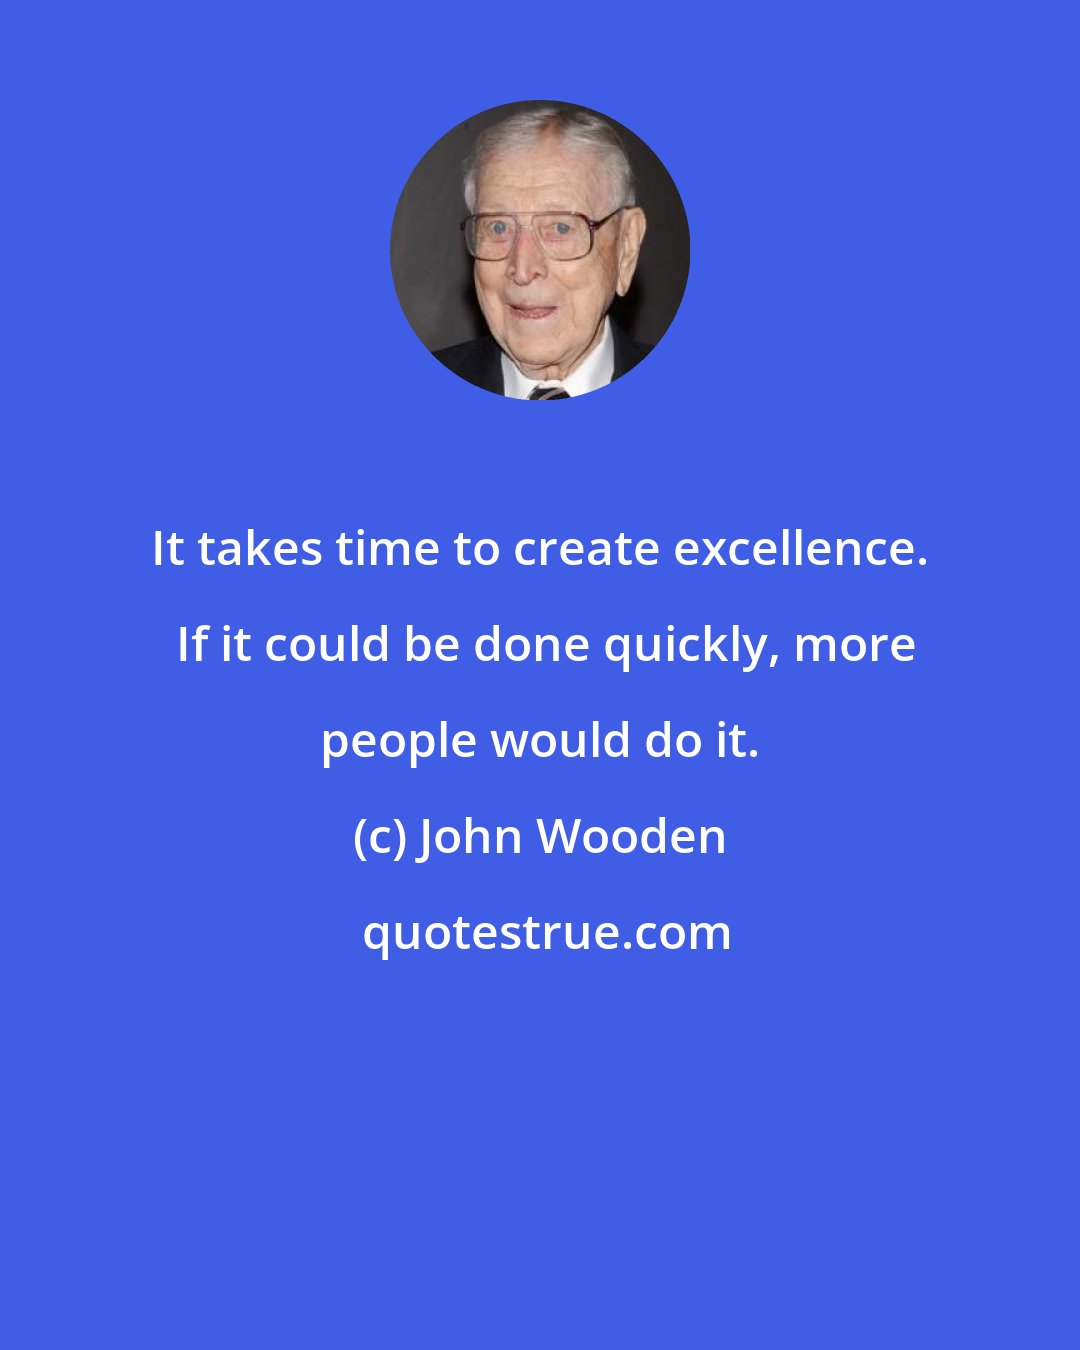 John Wooden: It takes time to create excellence.  If it could be done quickly, more people would do it.